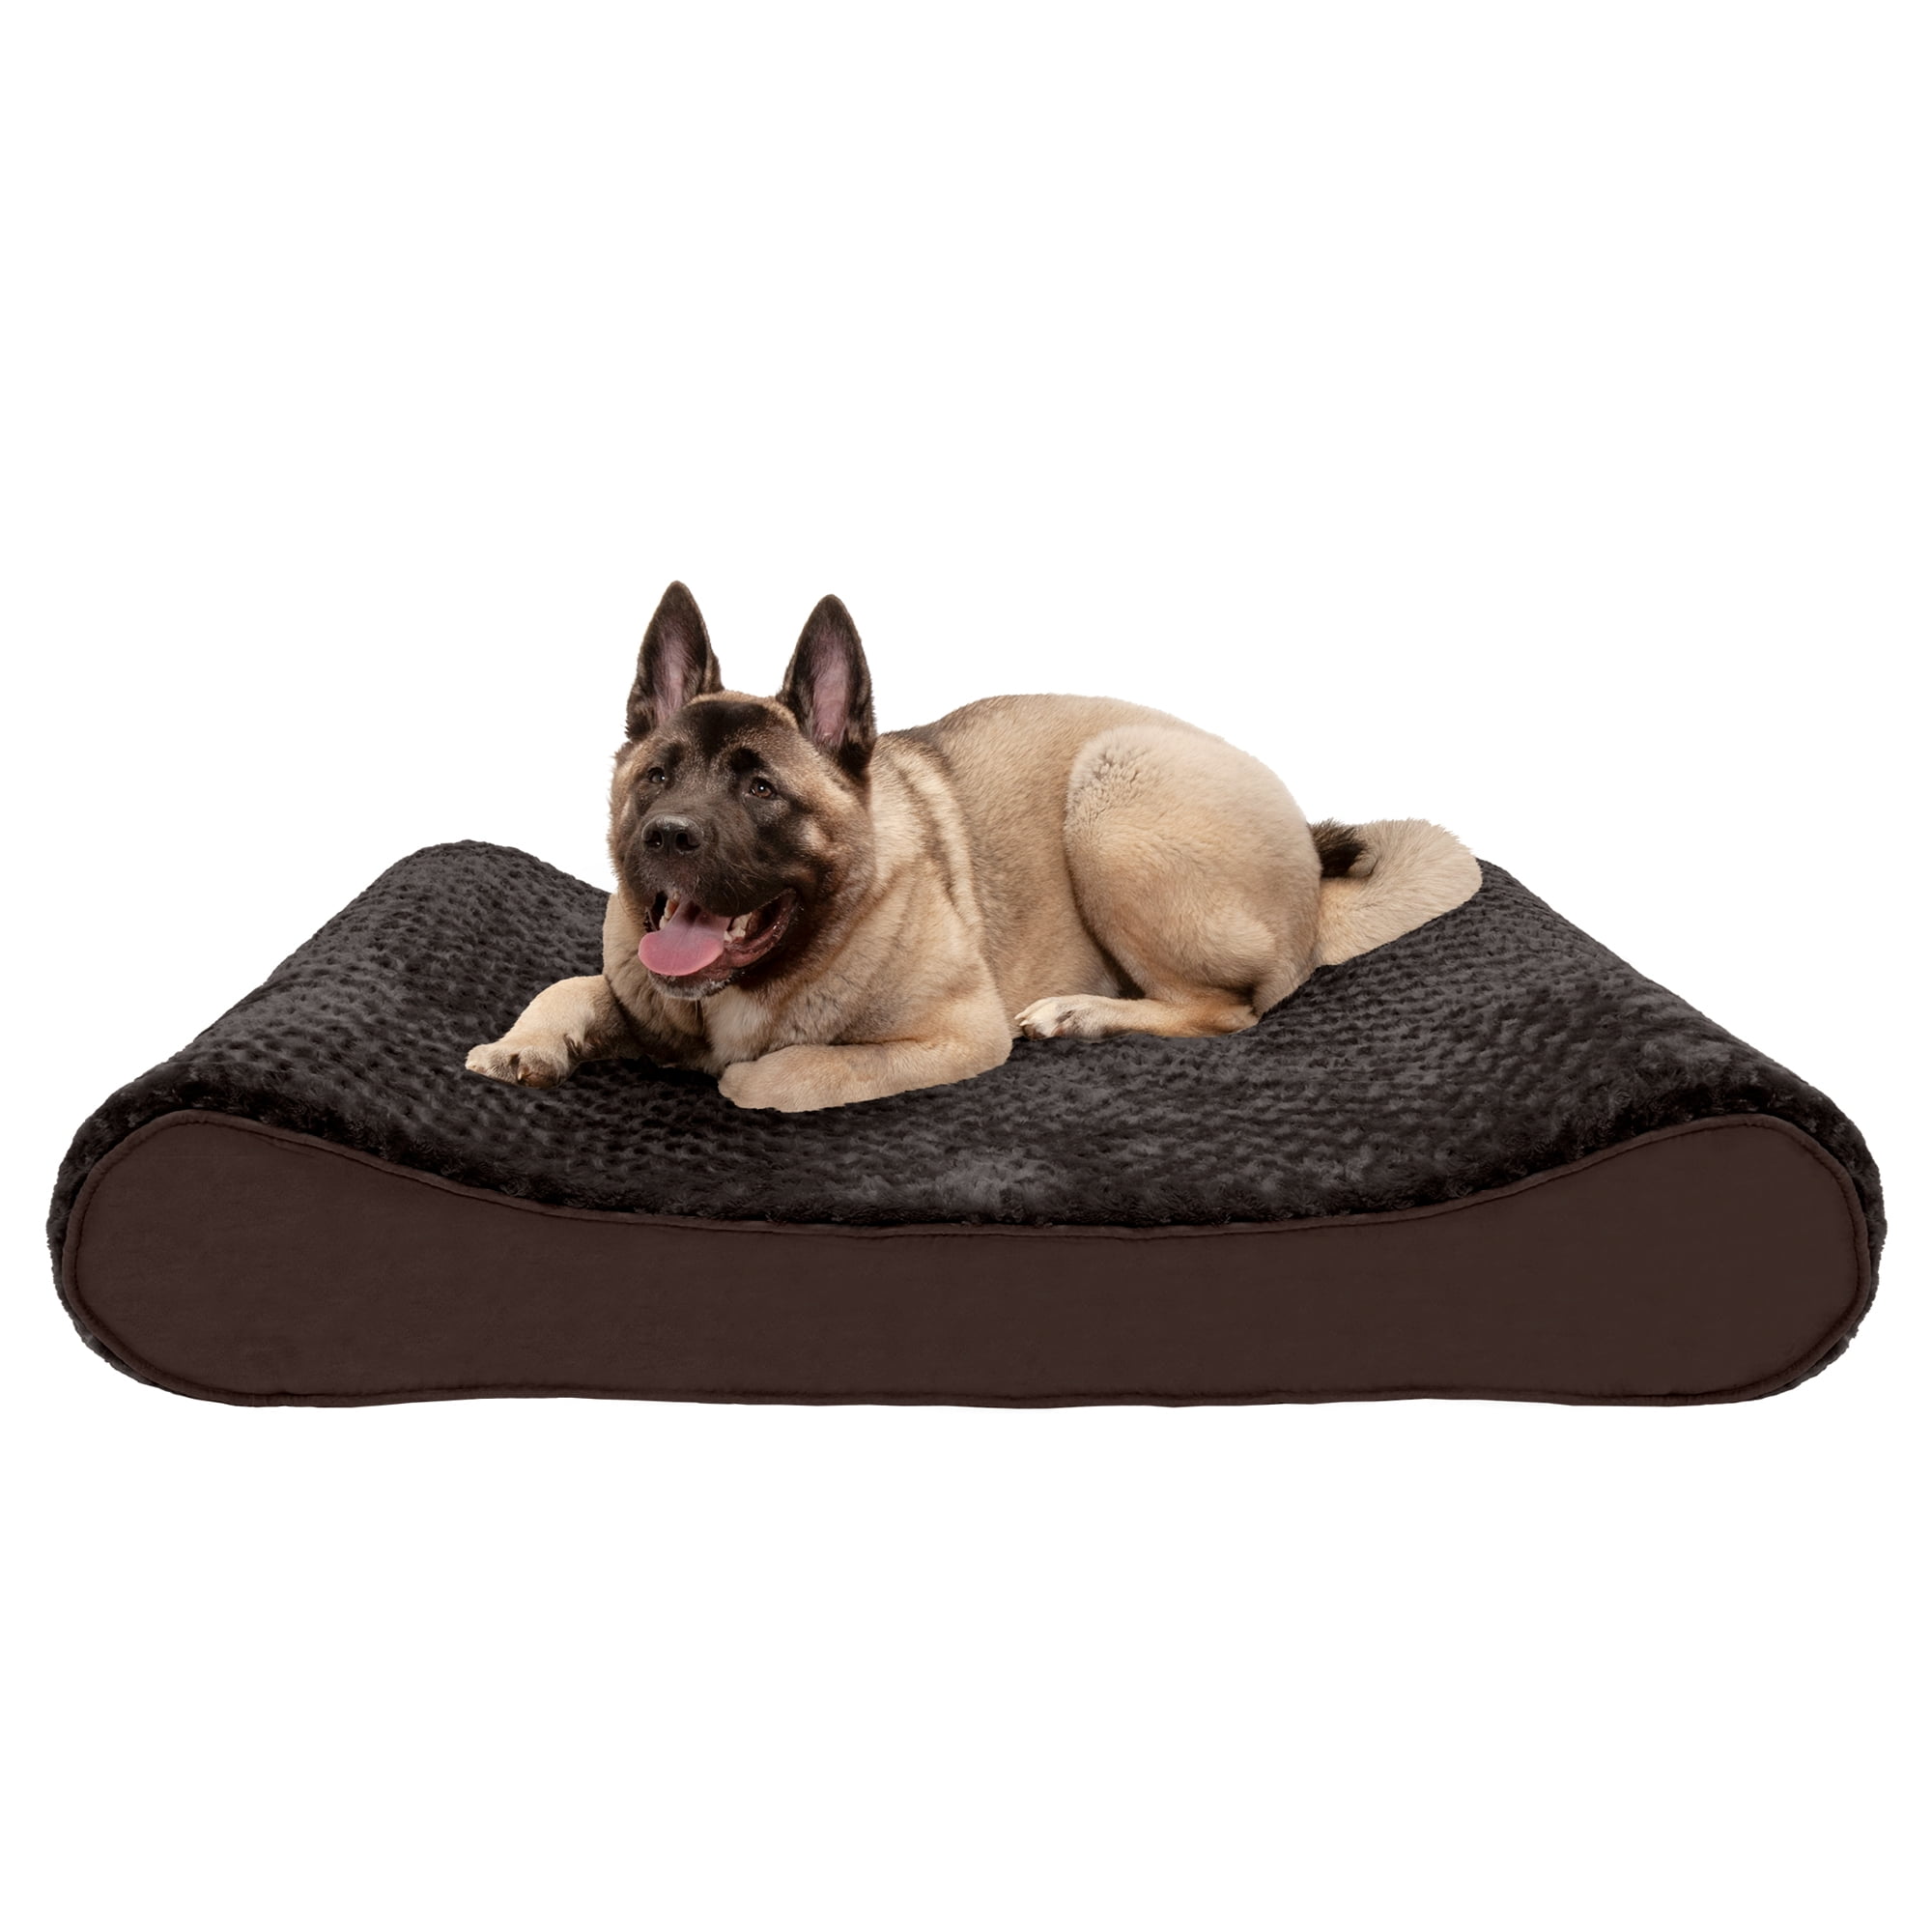 FurHaven Pet Dog Bed Memory Foam Ultra Plush Luxe Lounger Pet Bed for Dogs   Cats, Chocolate, Jumbo Plus